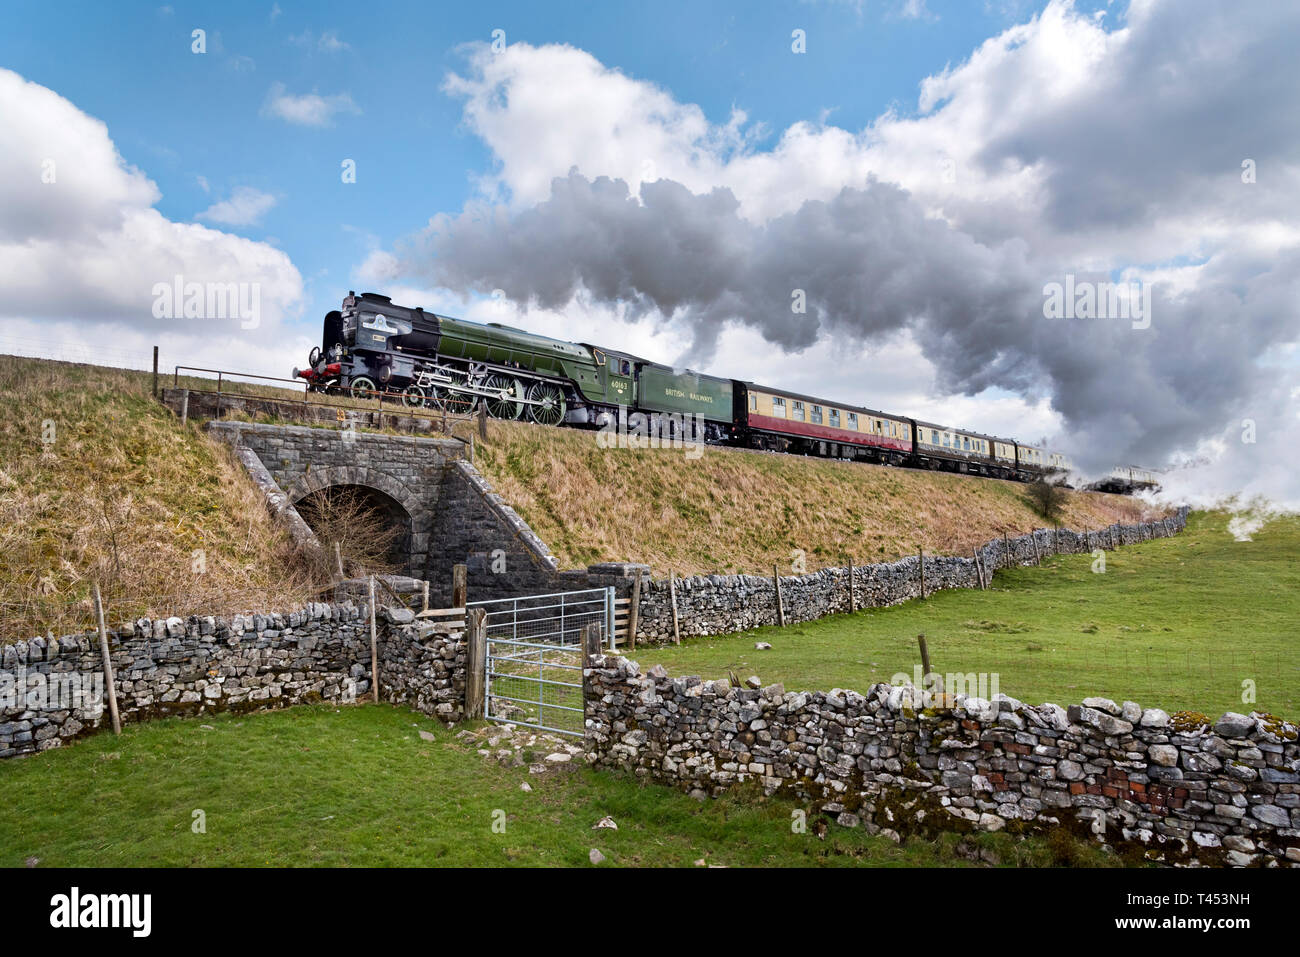 Settle, North Yorkshire, UK, 13th April 2019. The 'Tornado' steam locomotive hauls 'The Border Raider' special train on the Settle to Carlisle railway line. Seen here at Selside, near Settle, in the Yorkshire Dales National Park. The steam special ran from Crewe to Carlisle and return. Stock Photo